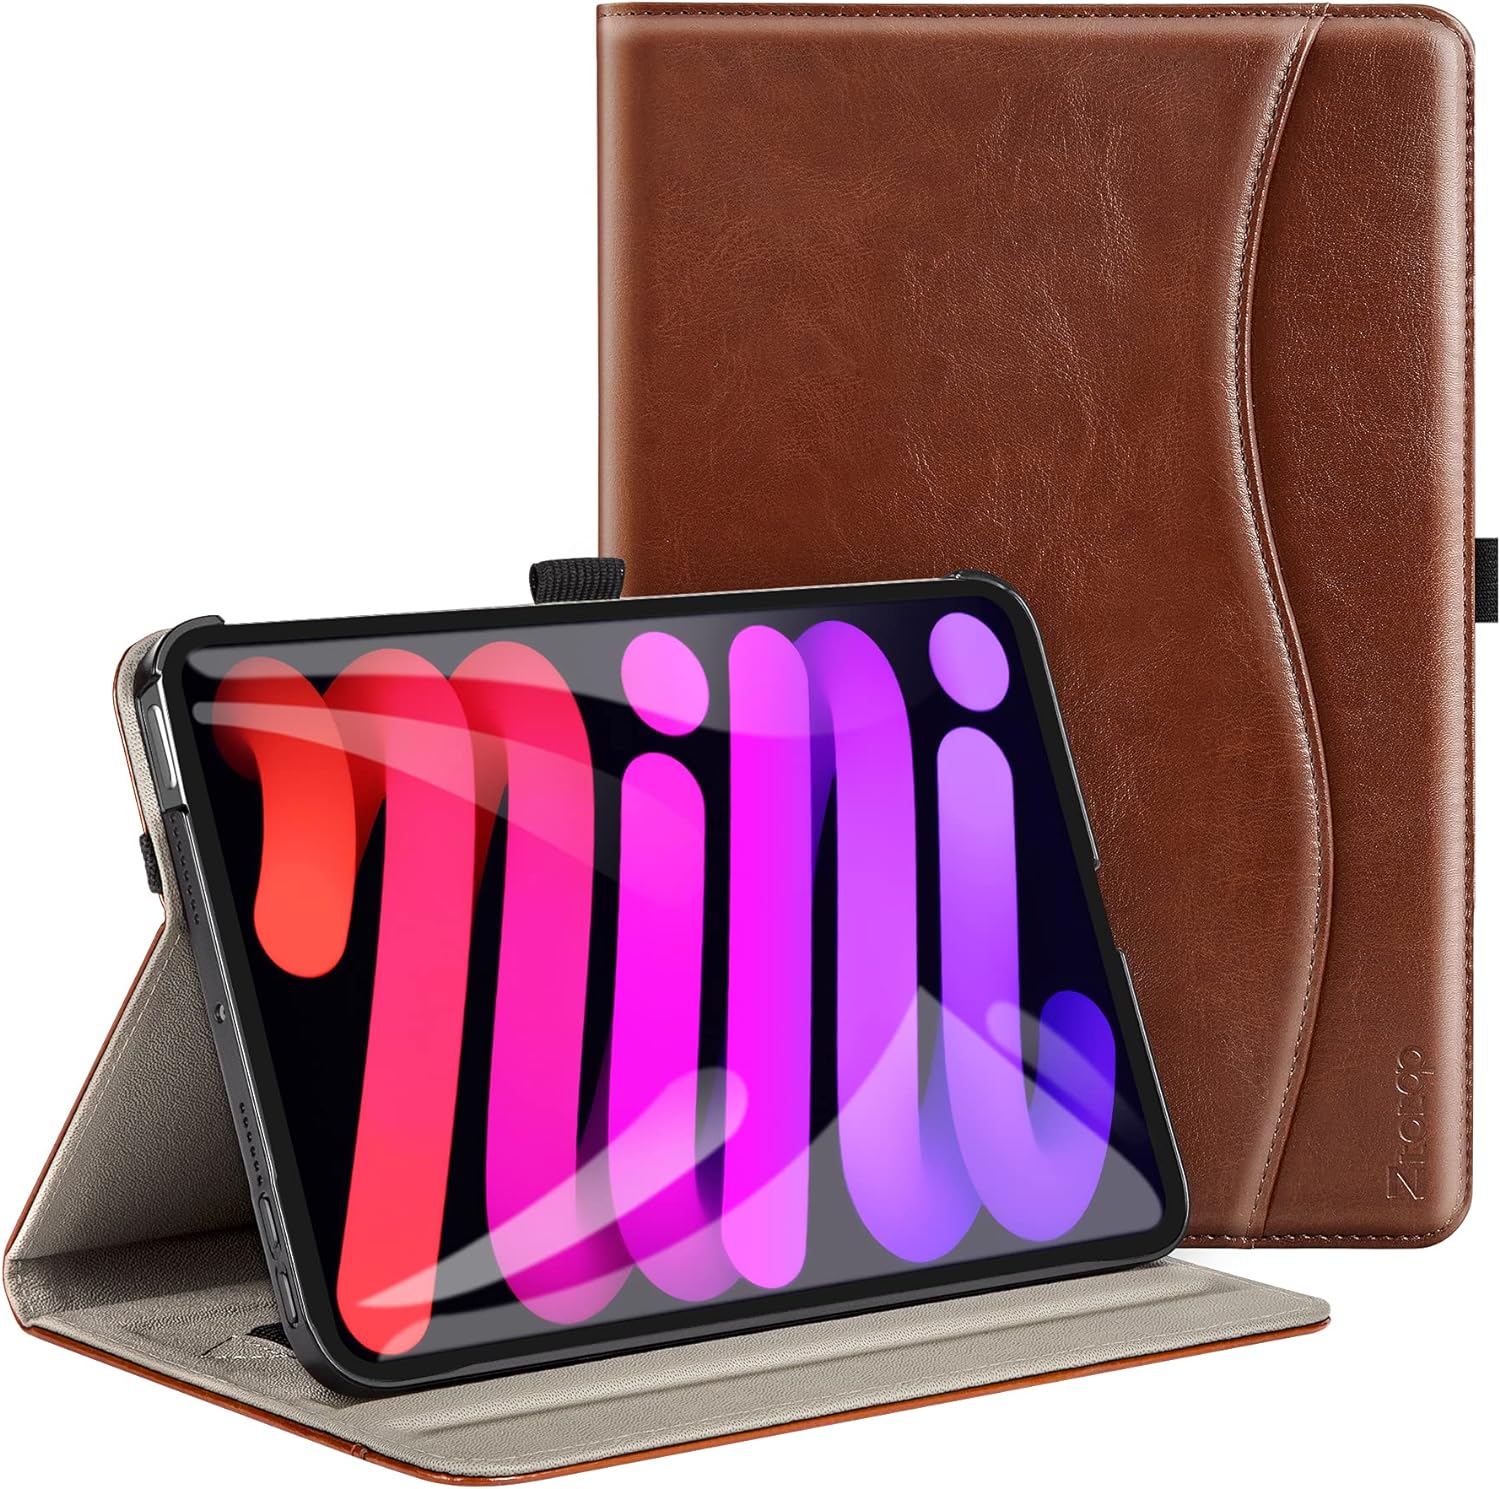 with Pencil Holder,applies Cowhide Folio Cover for iPad mini4 Genuine Leather case,（Pattern-Brown+Pencil Holder） Gexmil for iPad 7.9 Inch mini5 Case